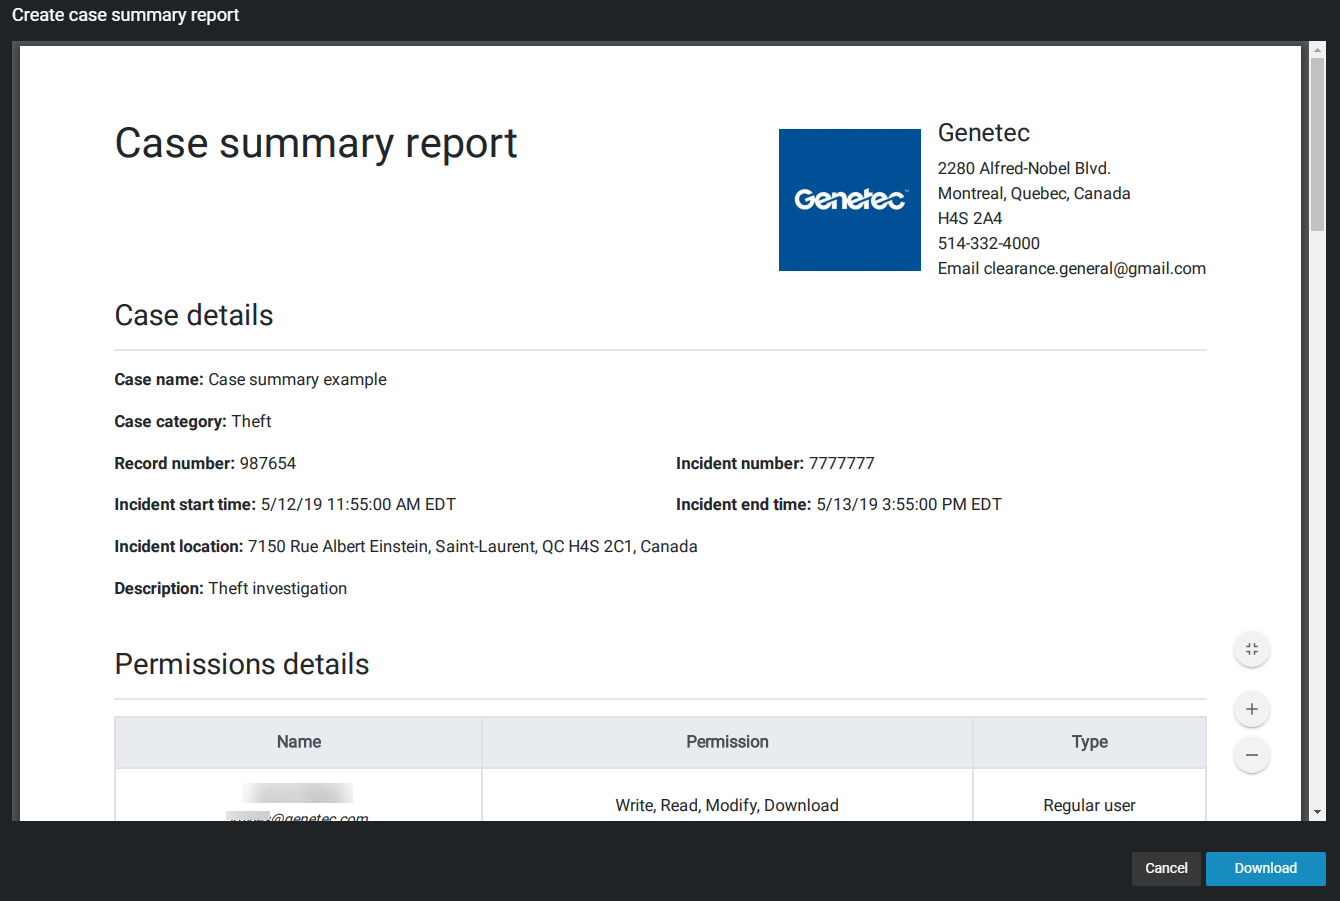 The case summary report, showing organization information and case details.